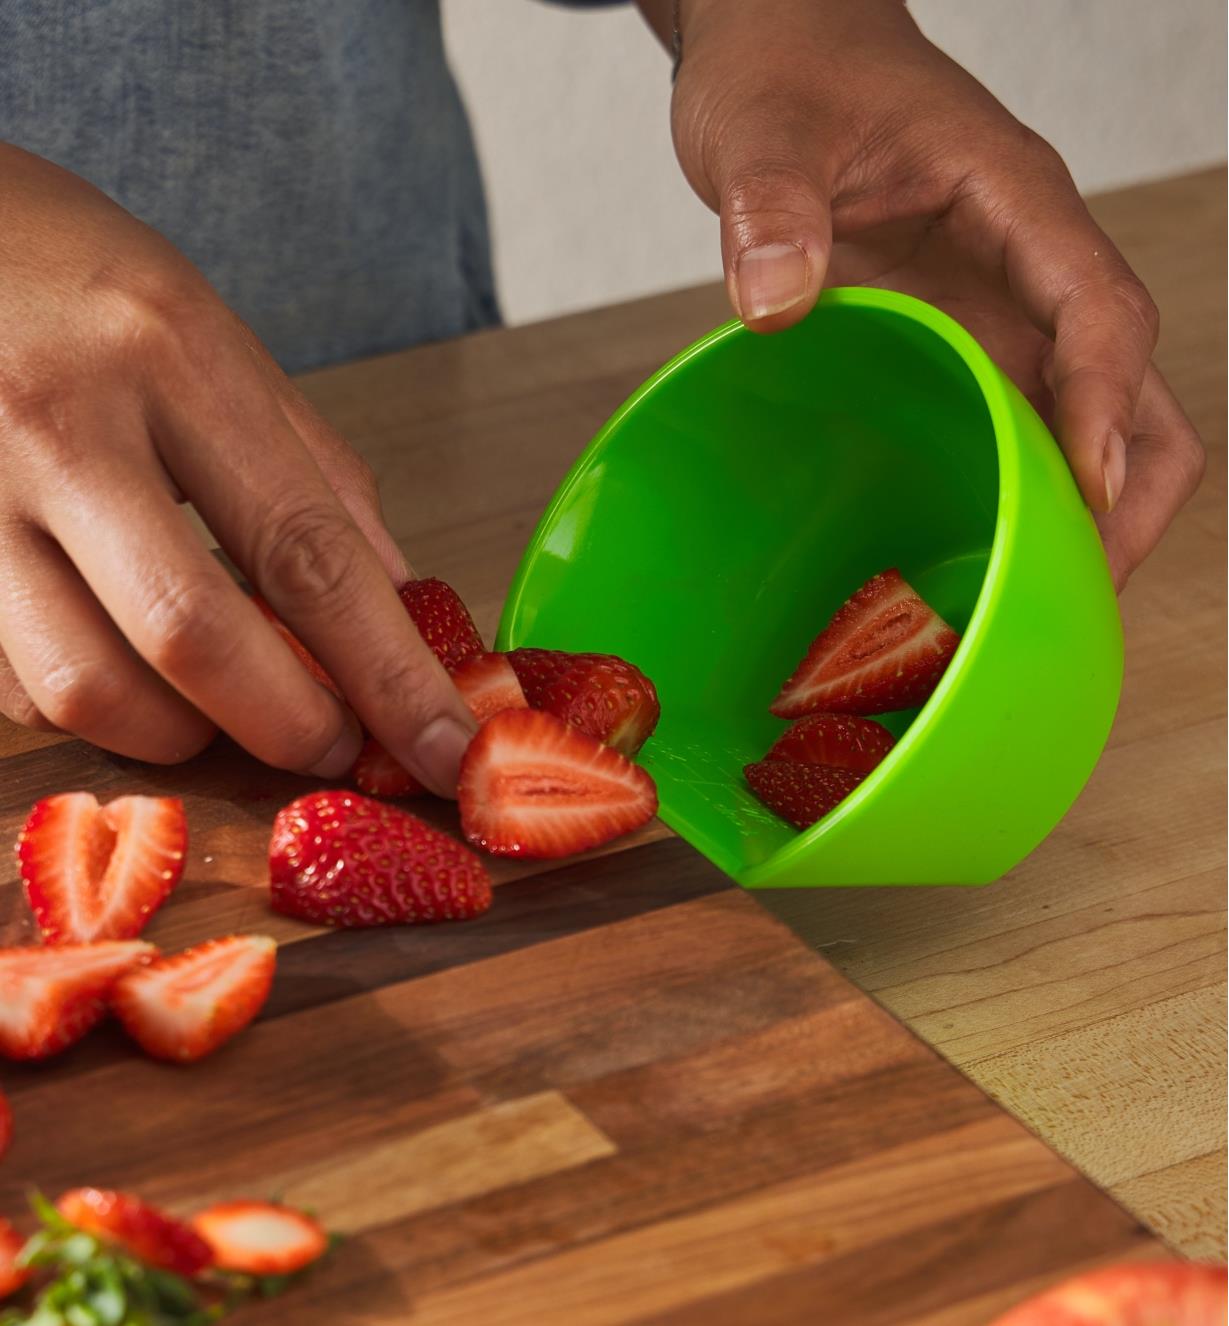 Pushing fruit pieces into a scoop measuring bowl placed at the lip of a cutting board